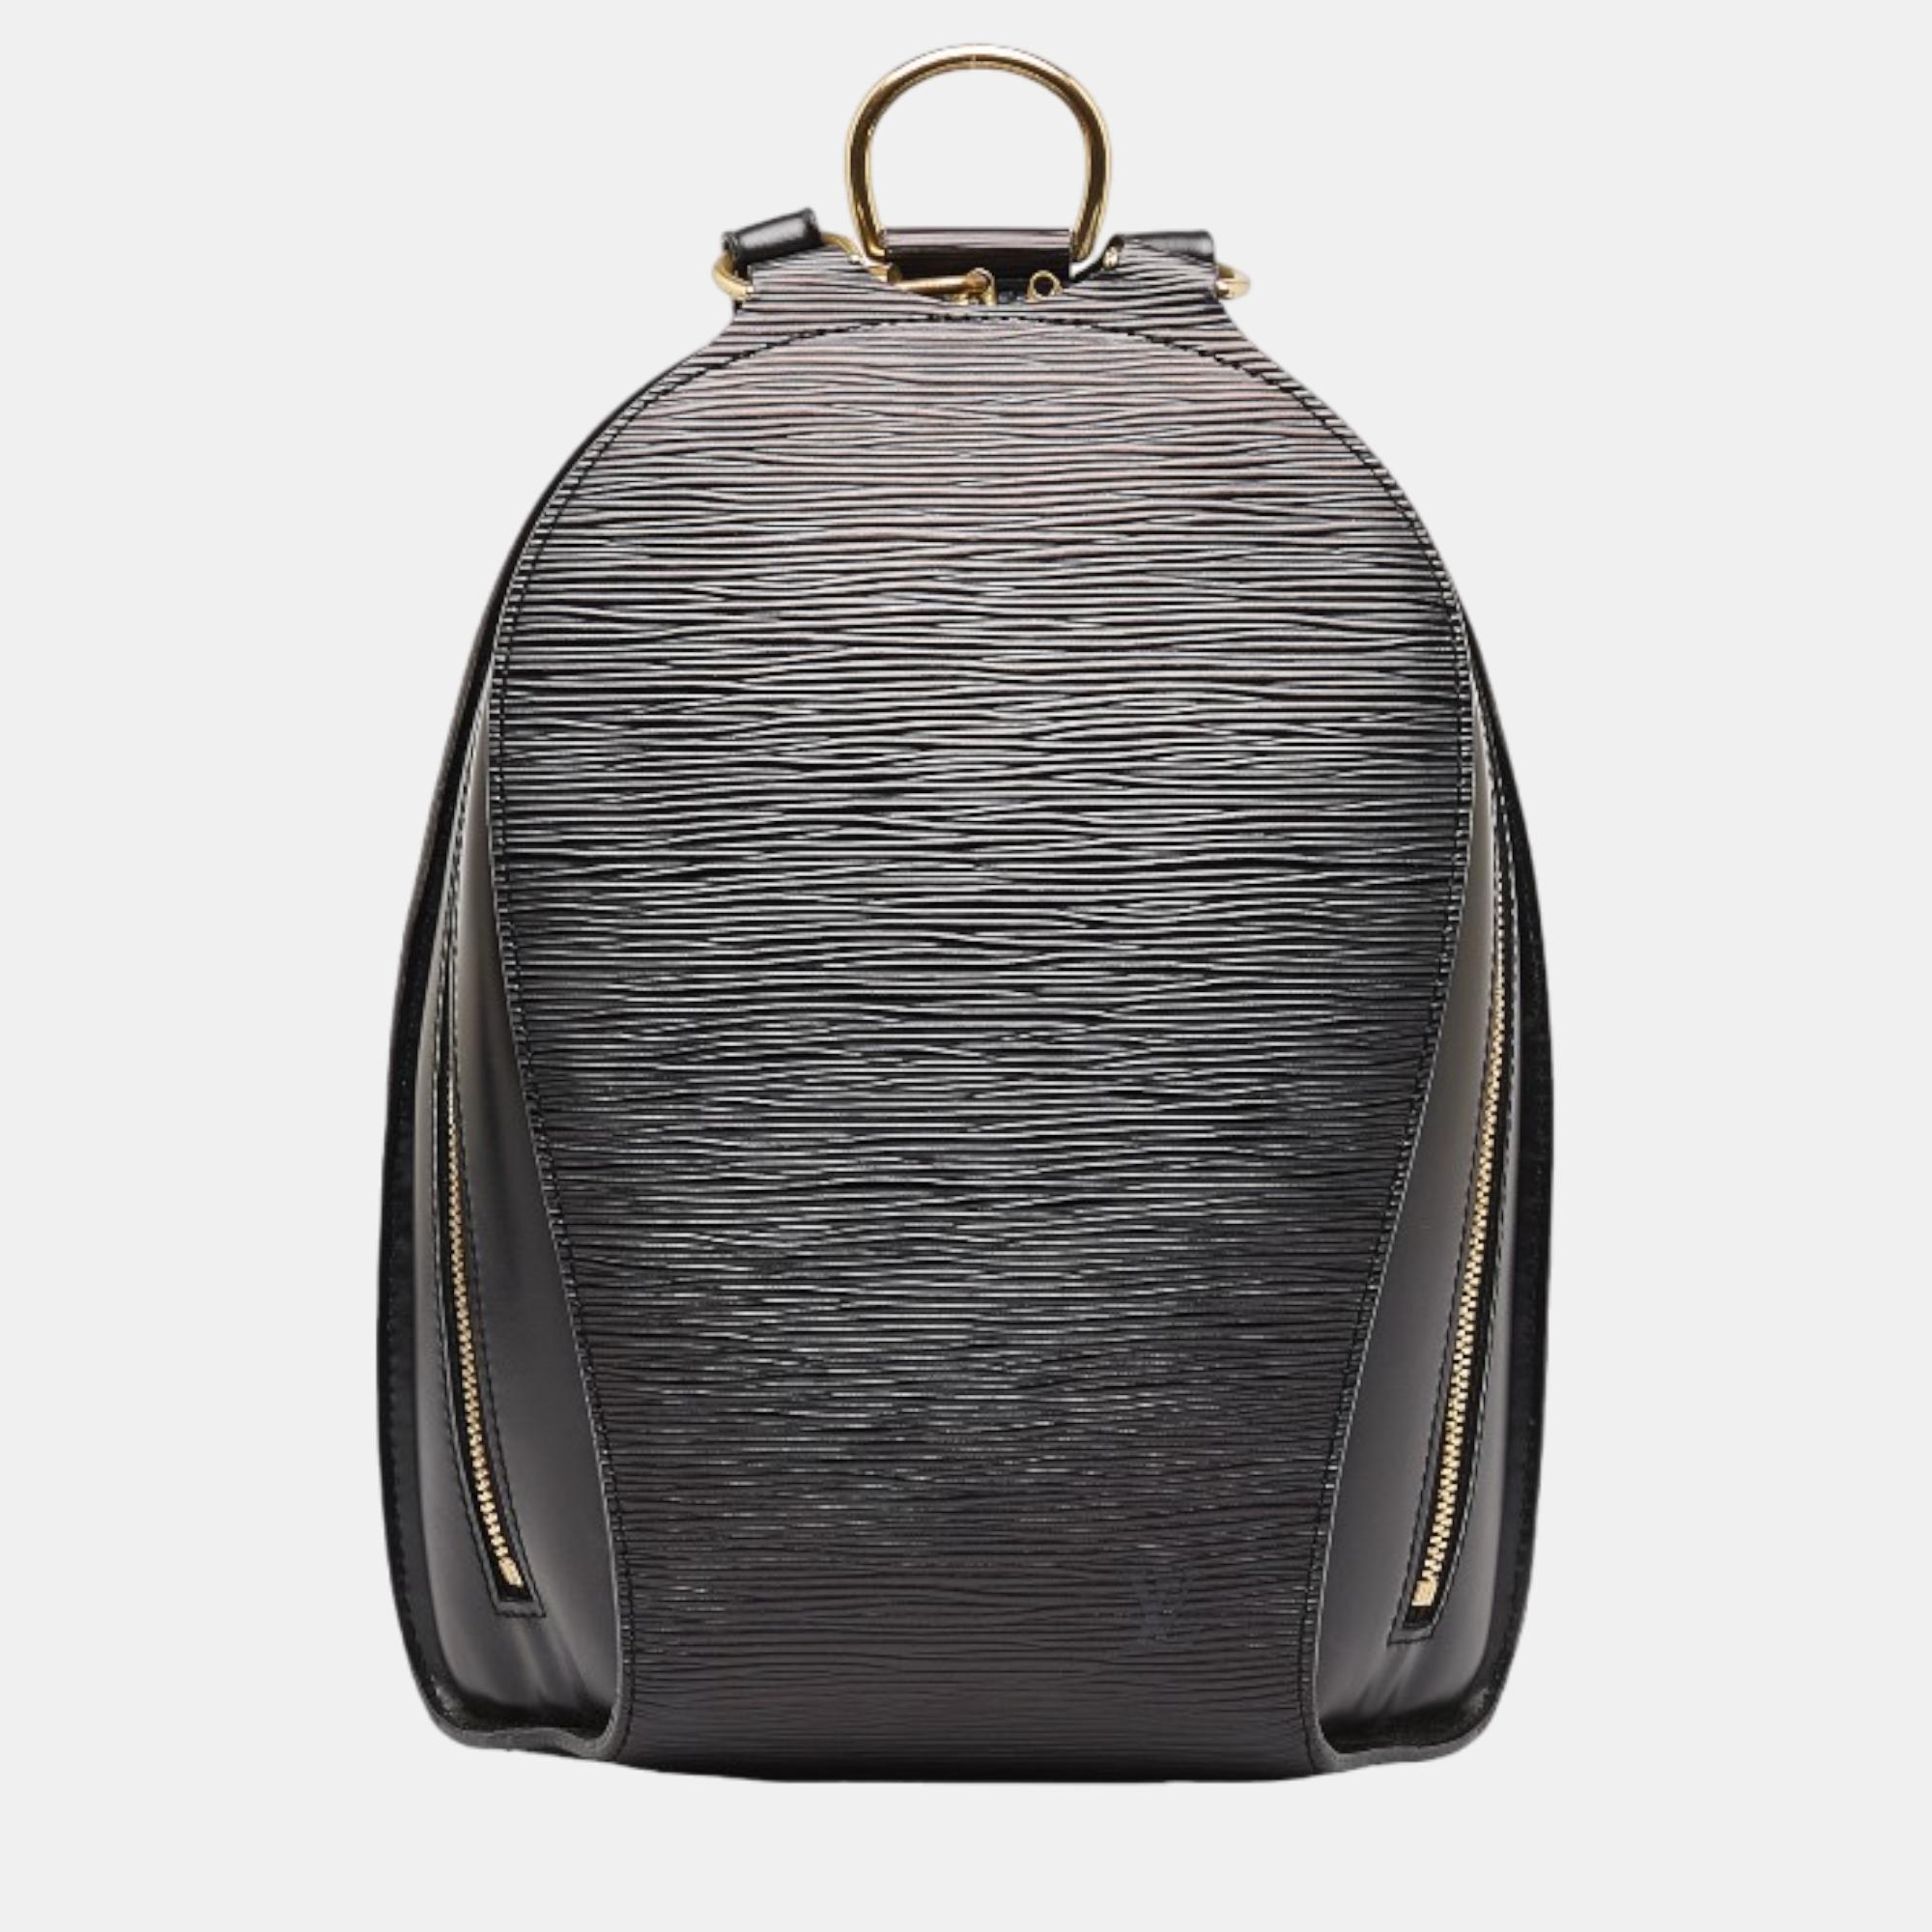 Louis vuitton black leather  mabillon backpack